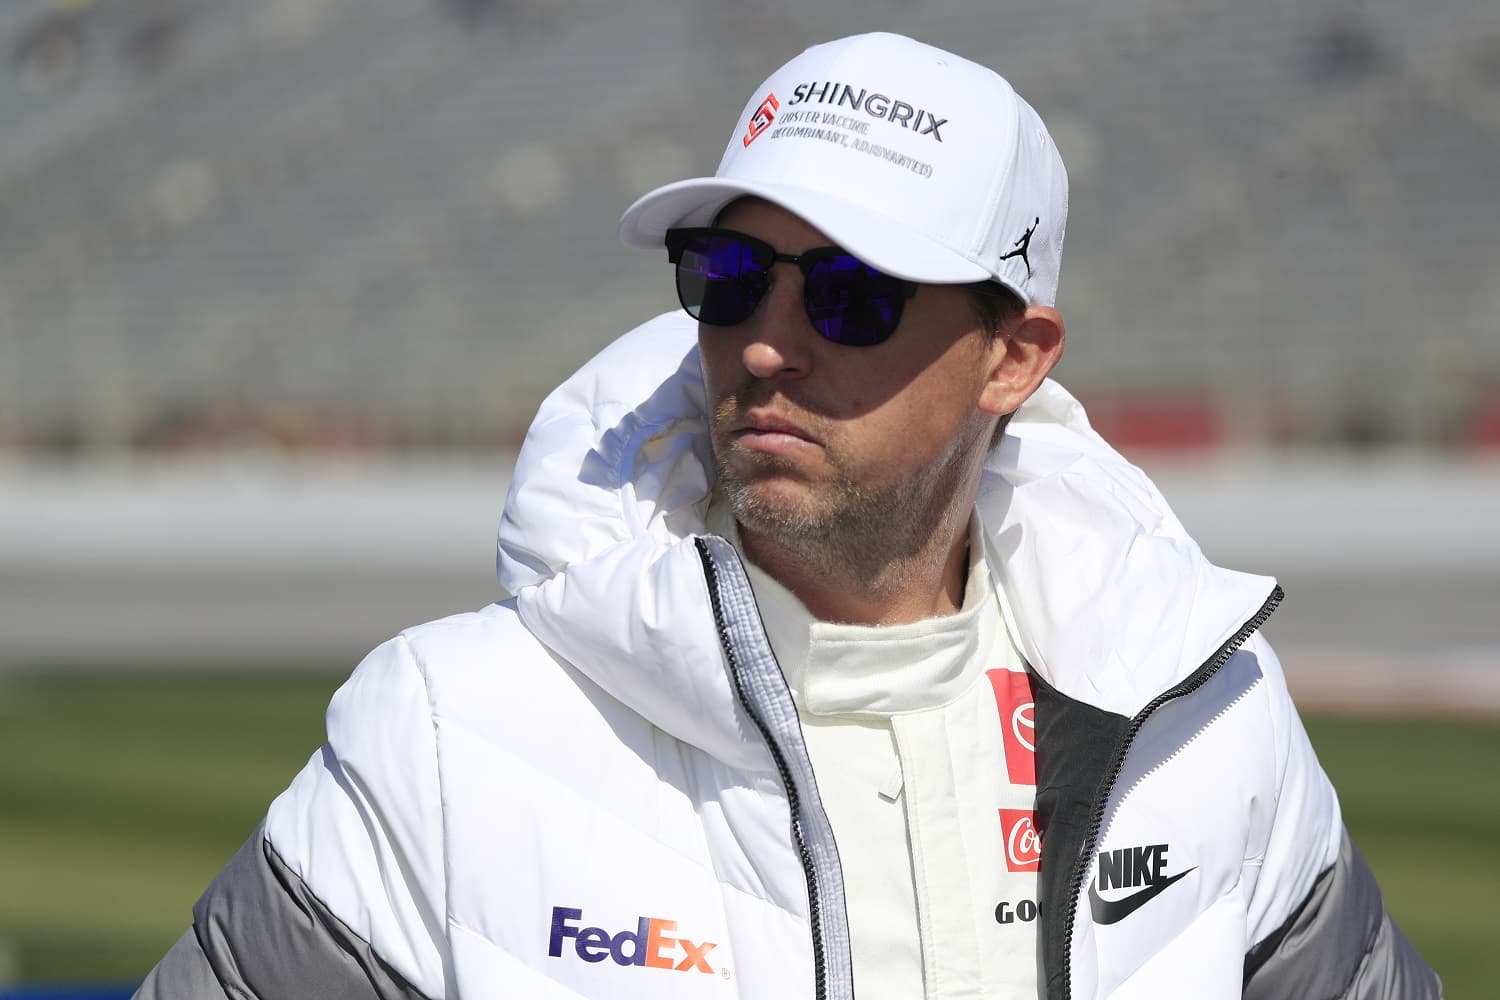 Denny Hamlin watches the action during qualifying for the NASCAR Cup Series Ambetter Health 400 on March 18, 2023 at Atlanta Motor Speedway. | Jeff Robinson/Icon Sportswire via Getty Images